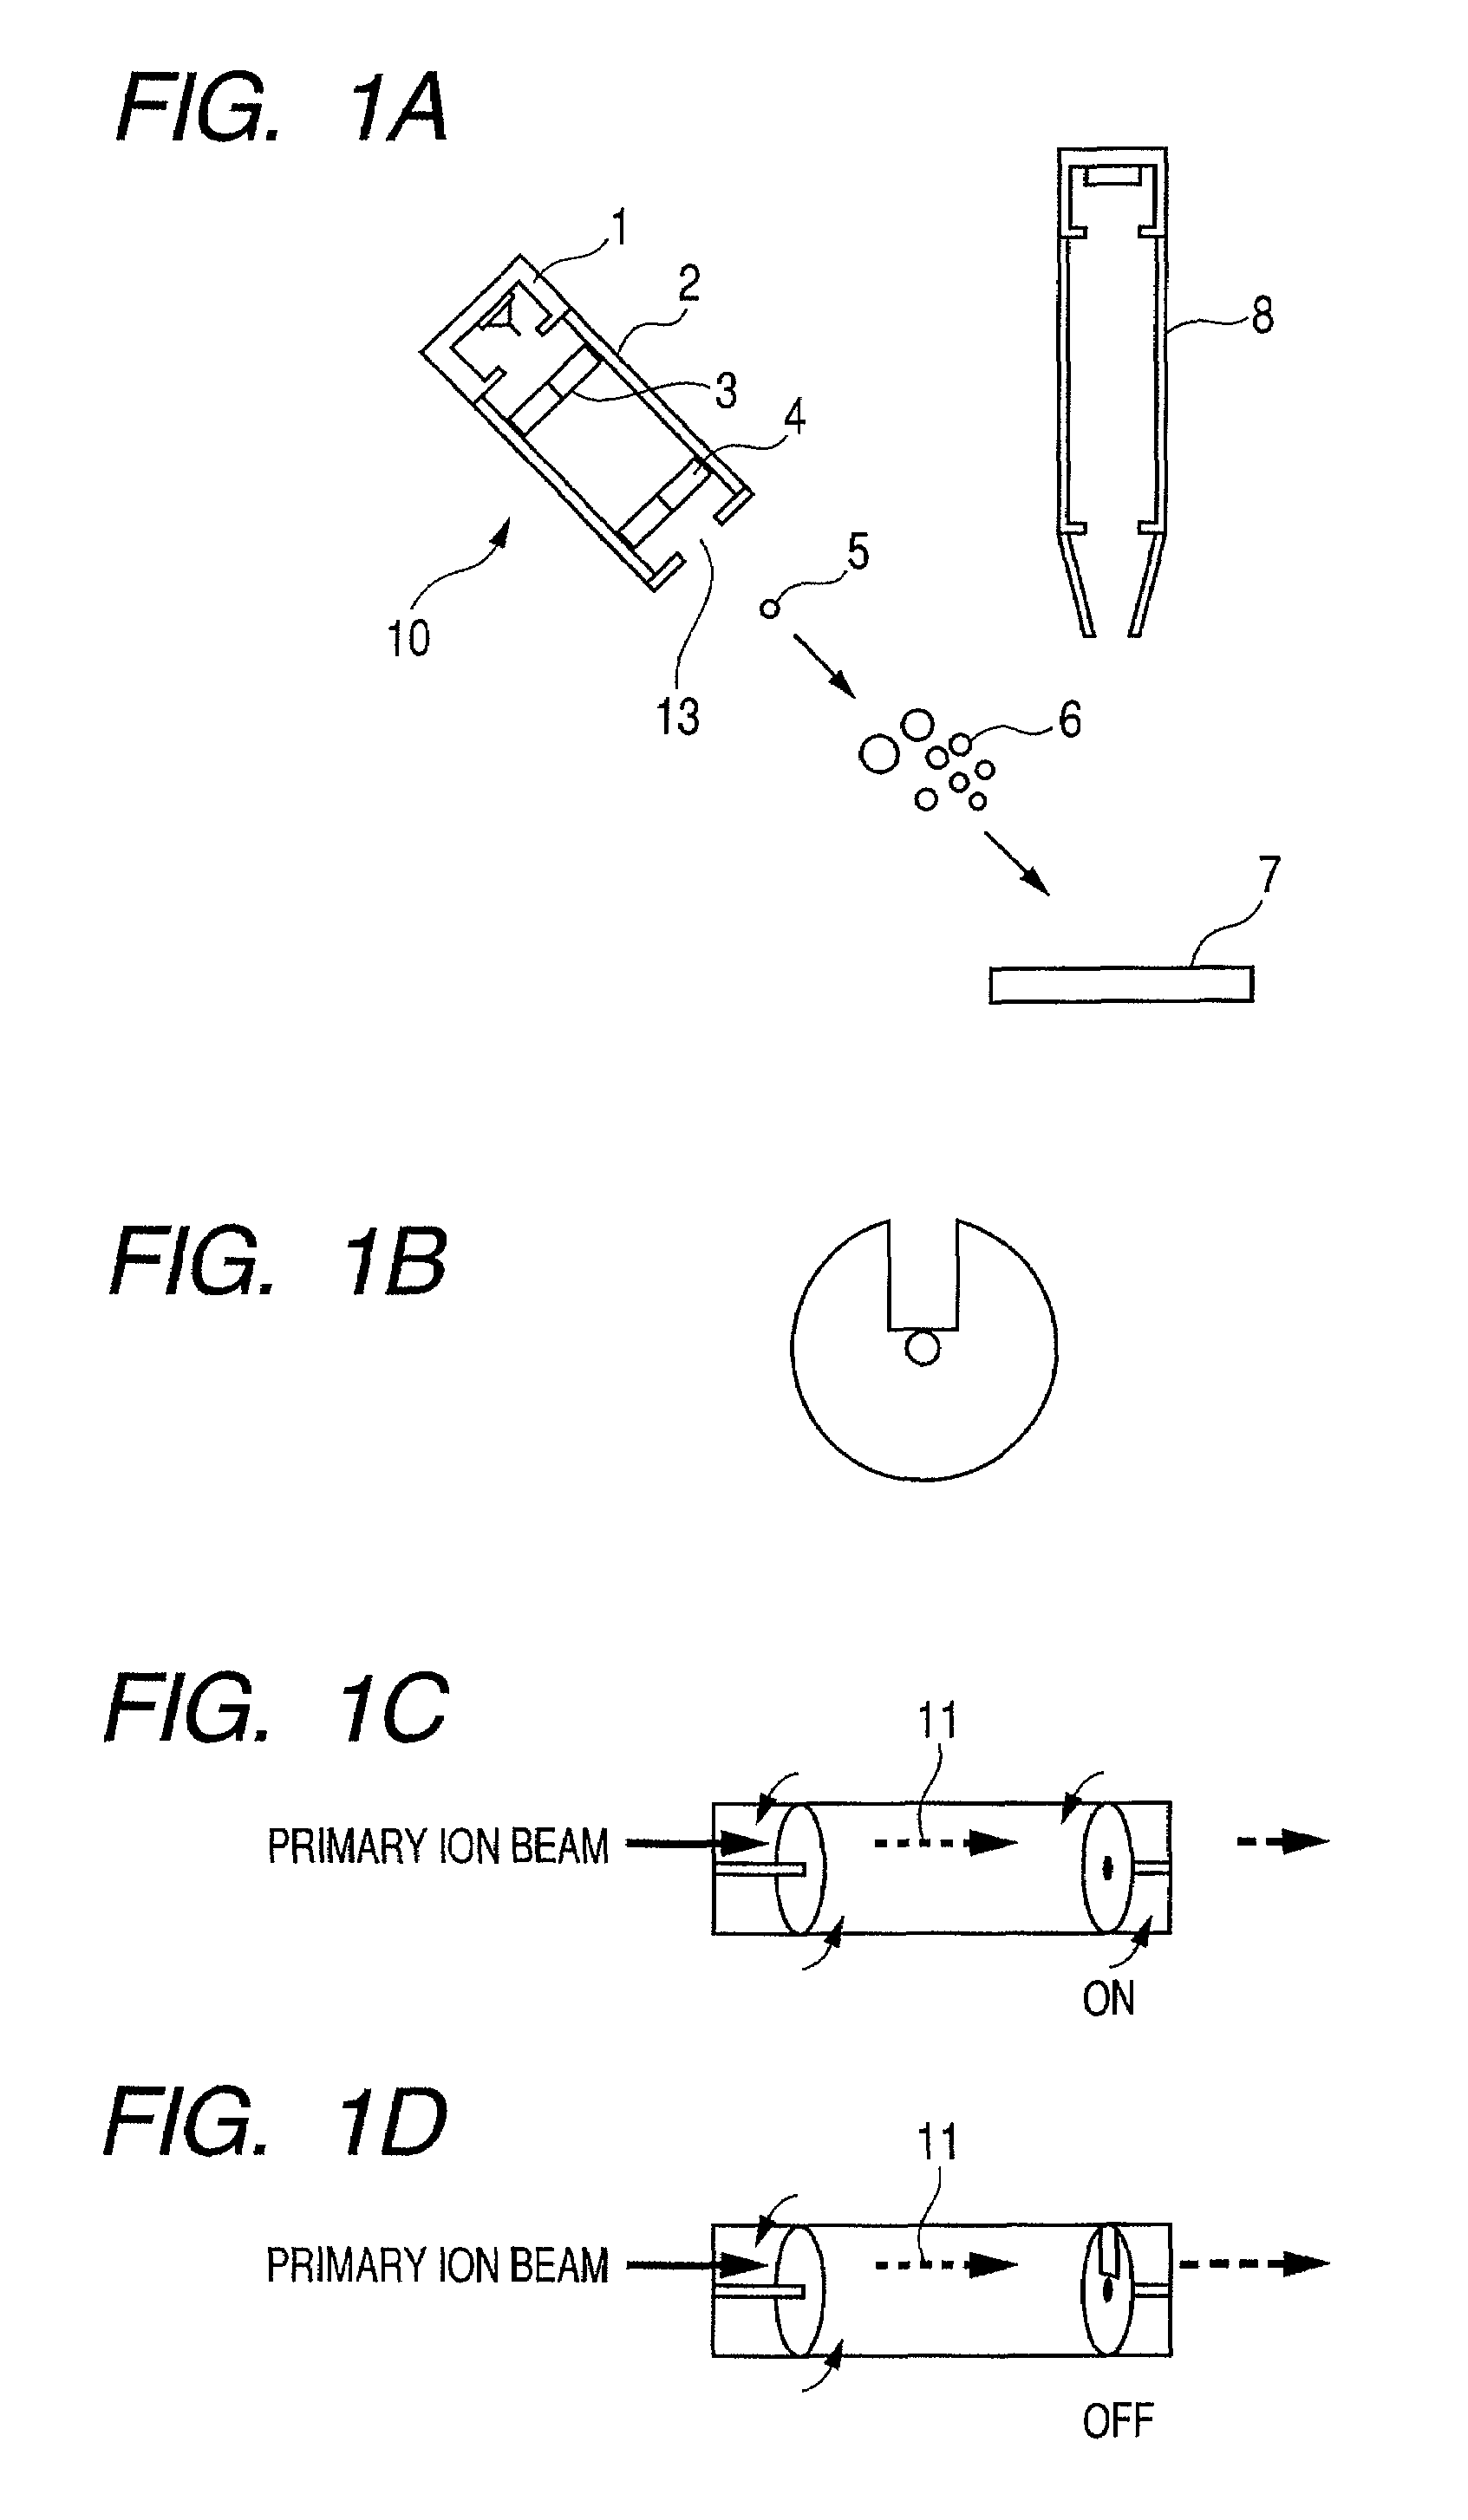 Time-of-flight secondary ion mass spectrometer